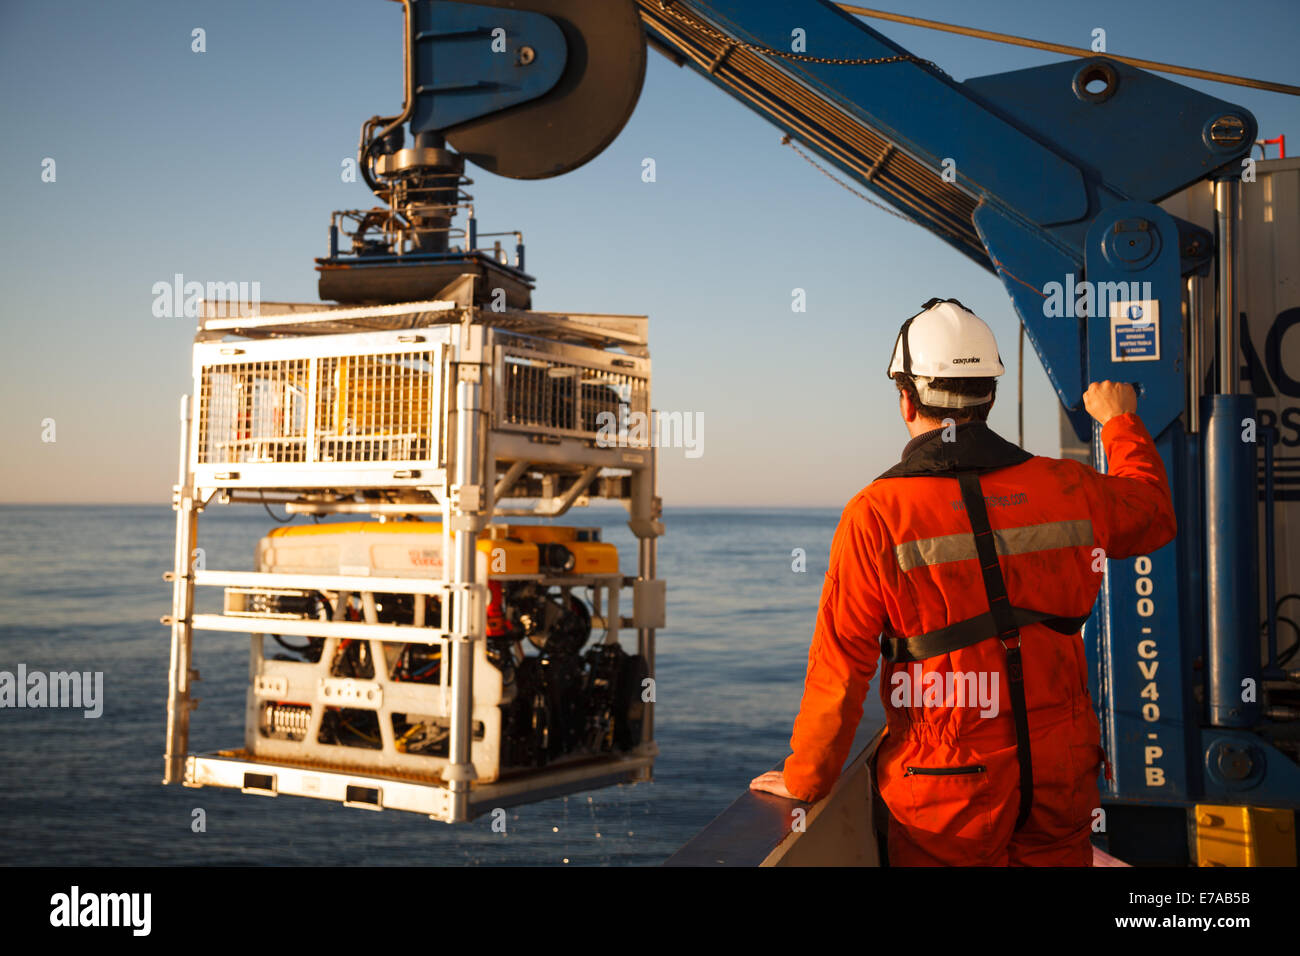 A Remotely Operated Vehicle (ROV) working offshore Stock Photo